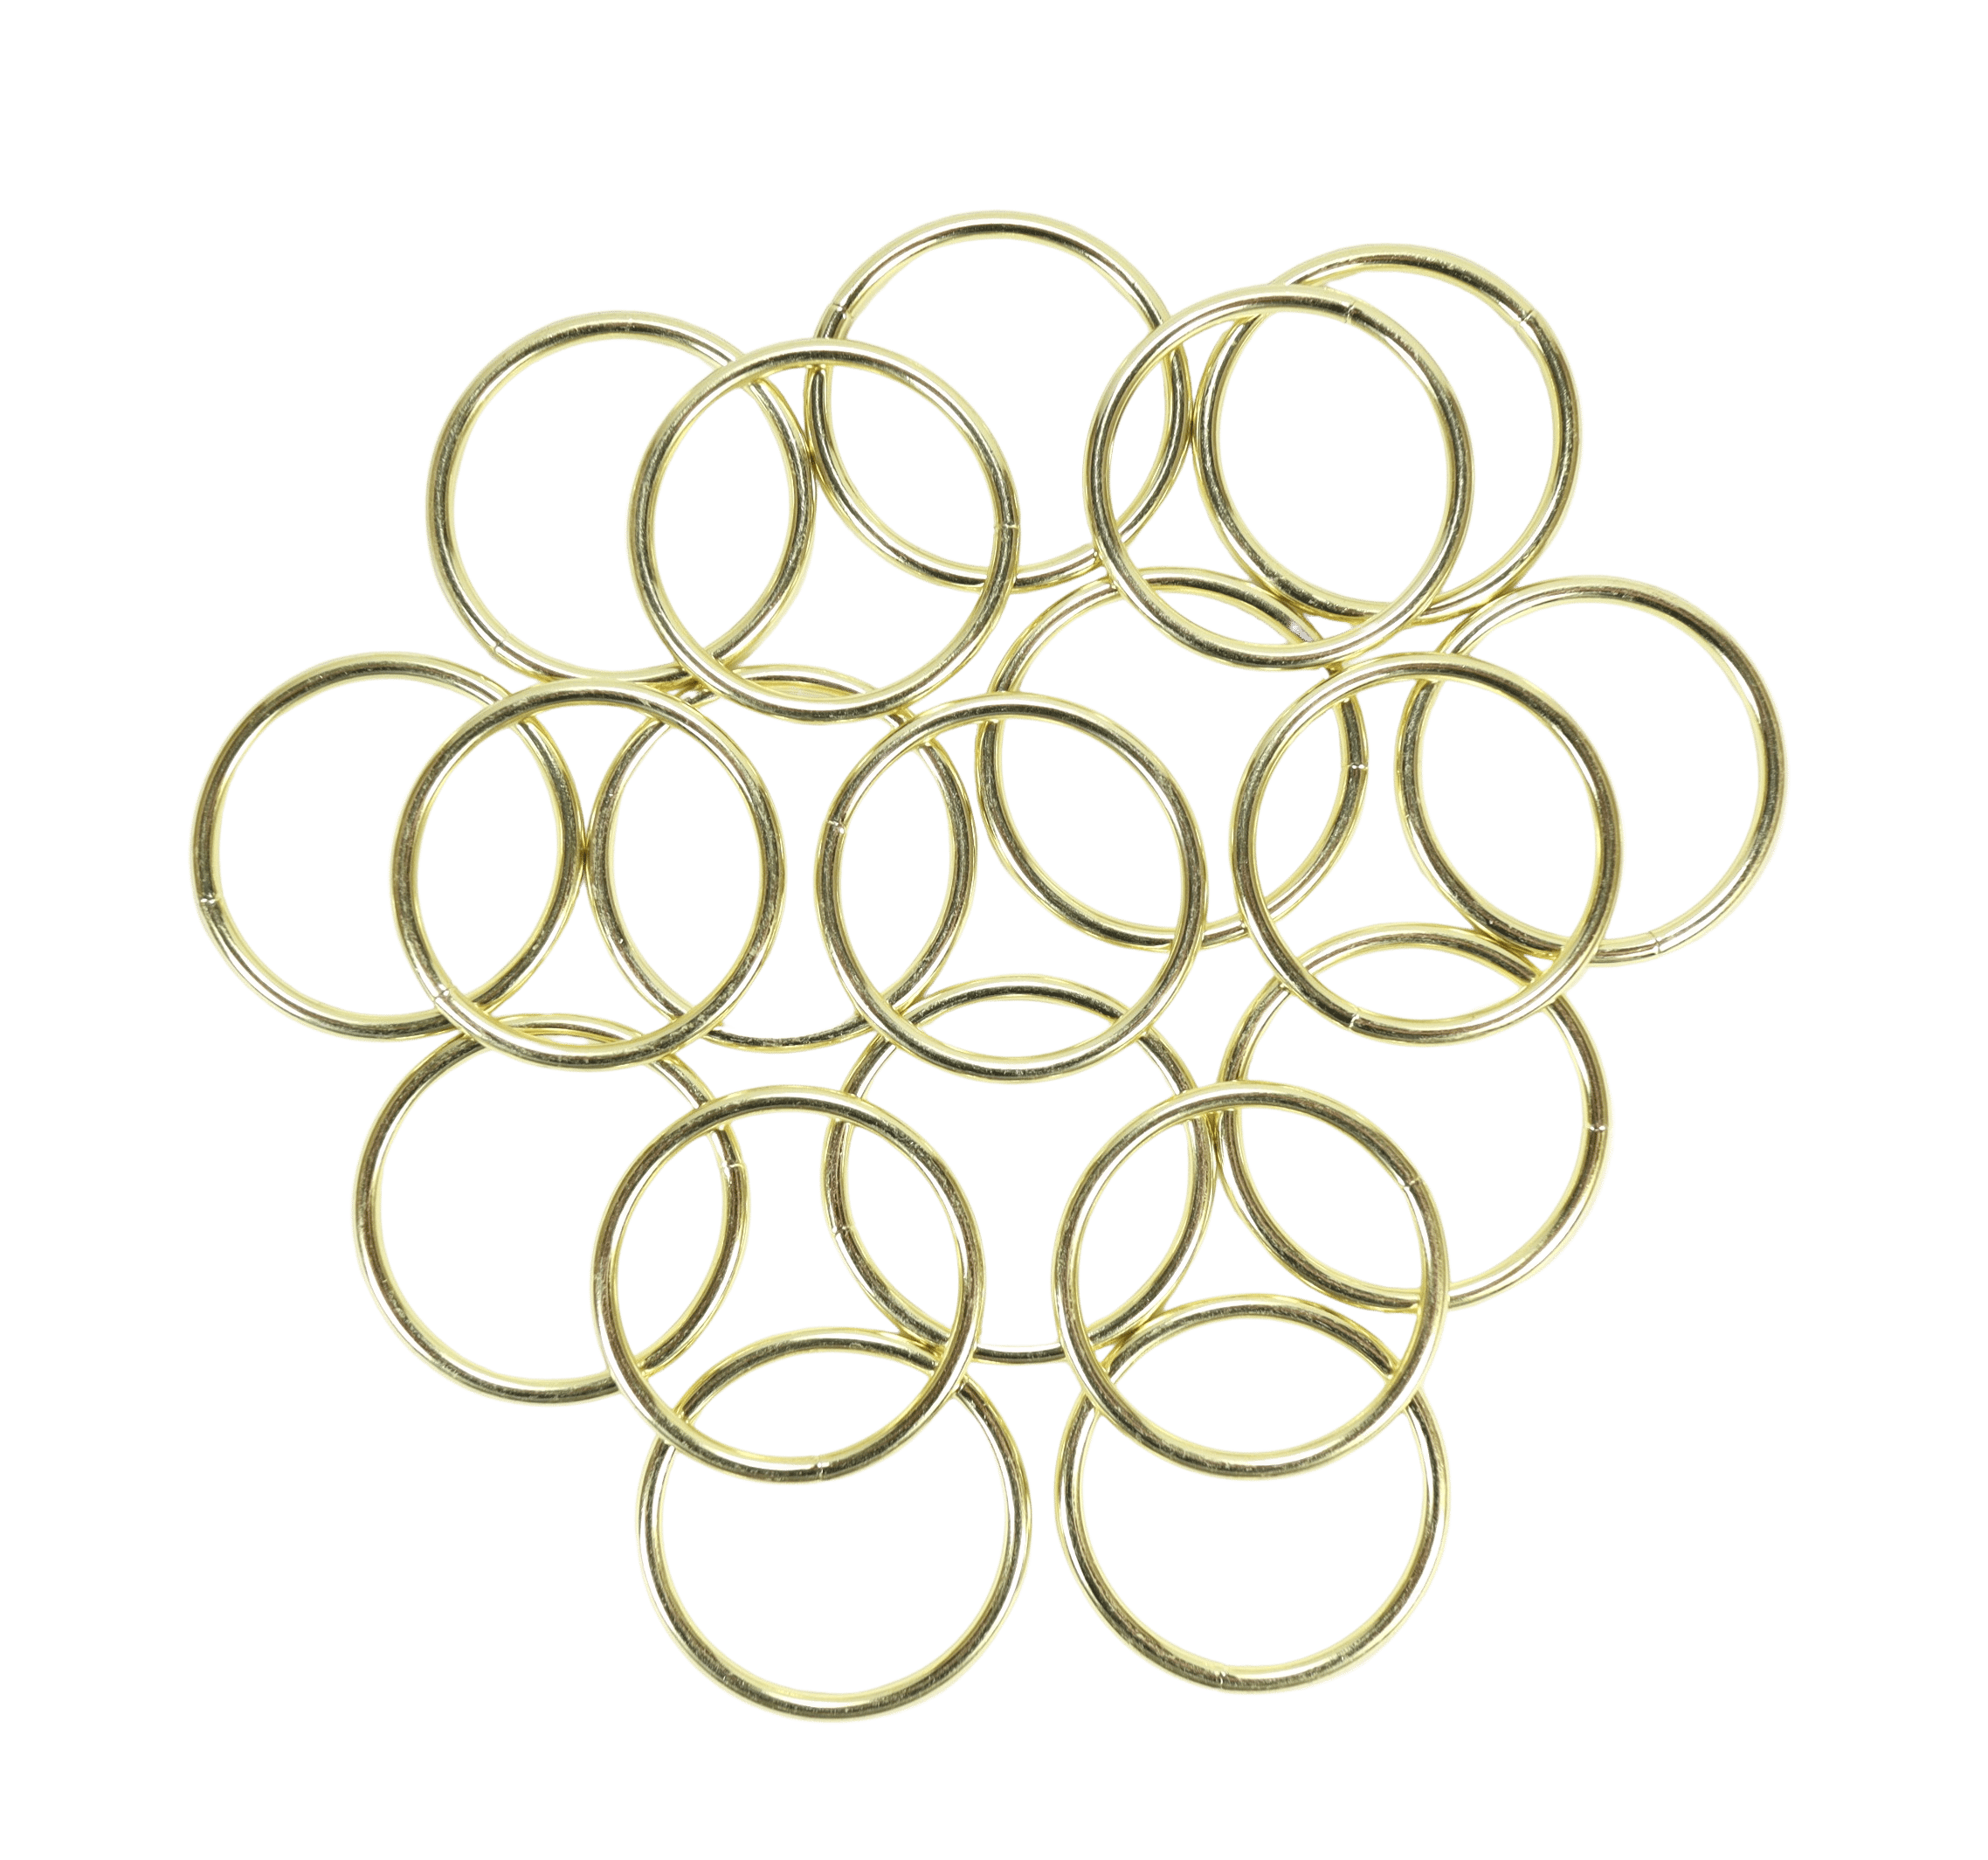 6 Pieces 20 Cm Metal Rings For Crafting Gold Made Of 3 Mm Metal